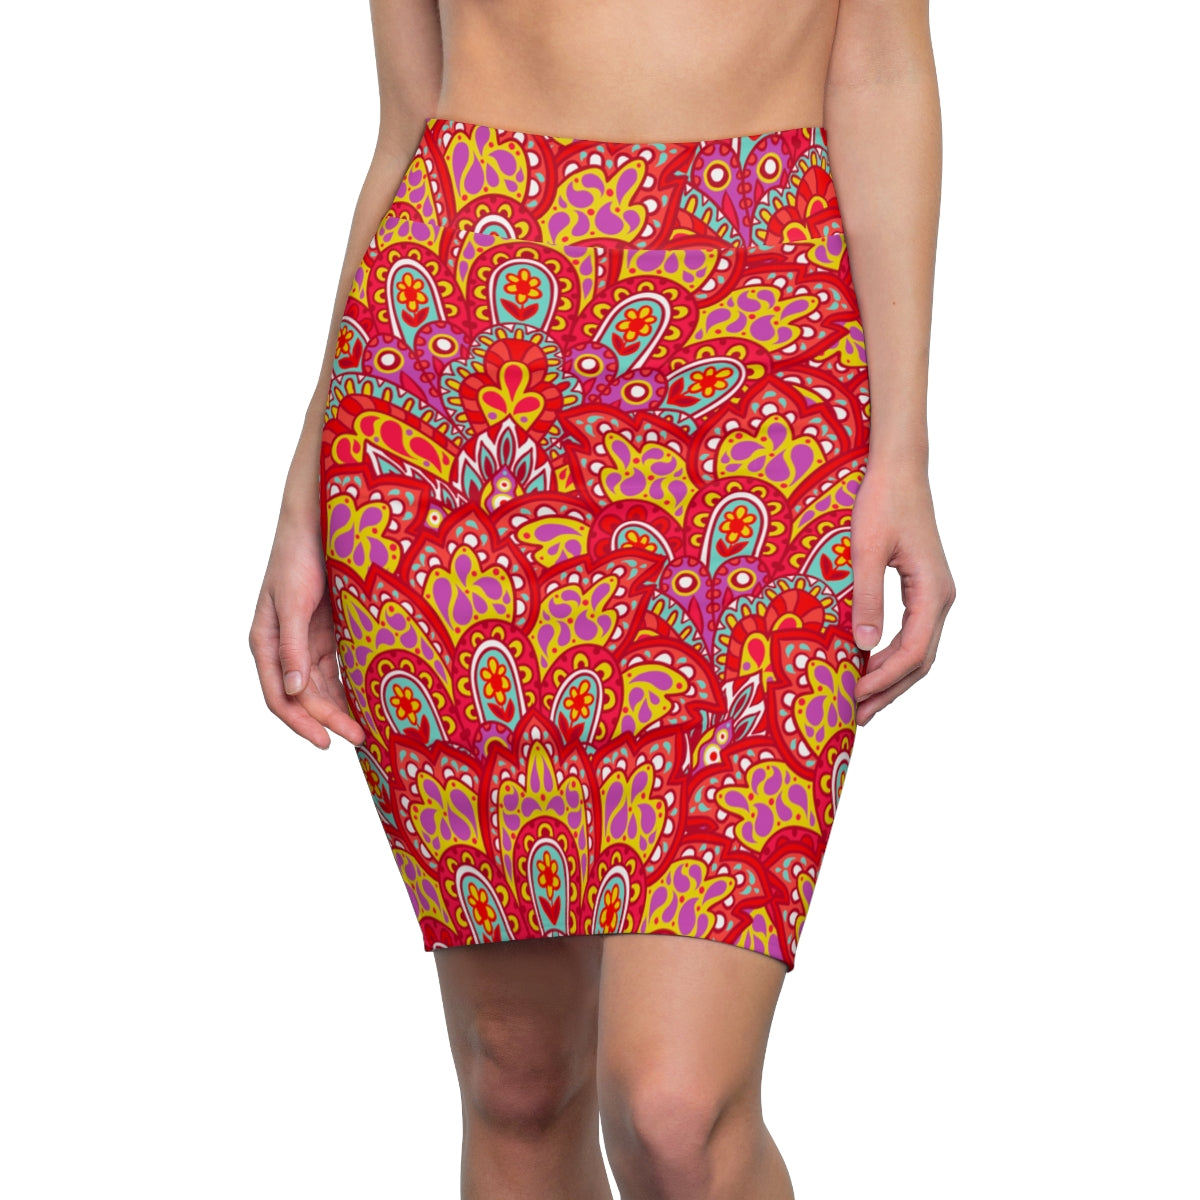 ELECTRIC RED PRINT - Pencil Skirt